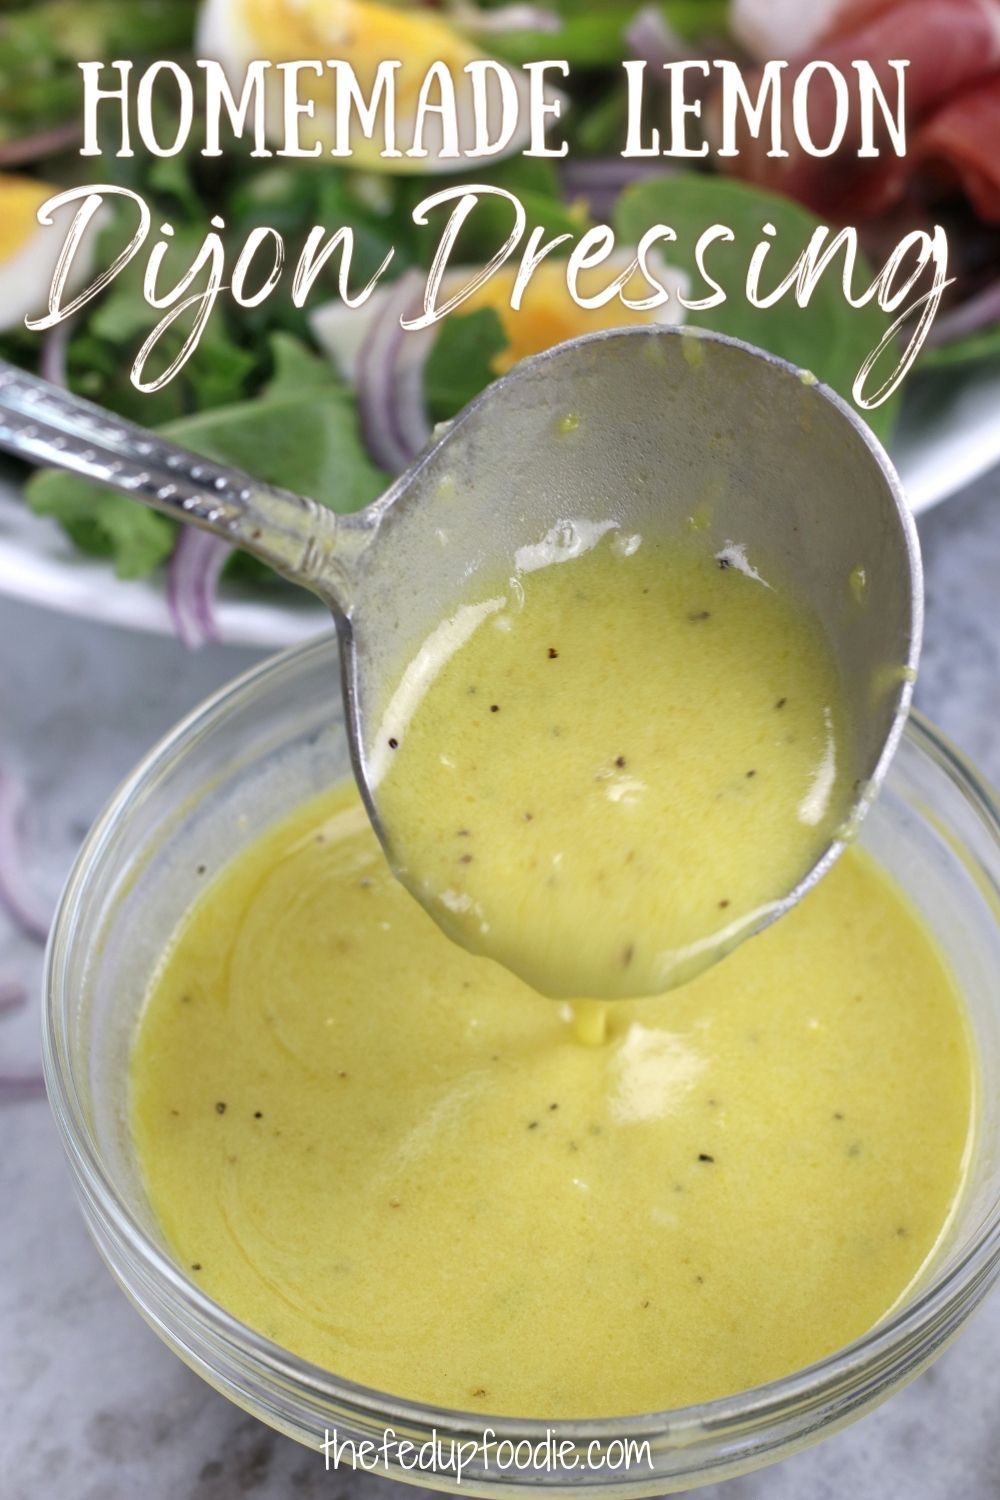 Easy to make, bright and tangy, this Lemon Dijon Dressing is a healthy and delicious way to enjoy homemade salads. Wonderful with seafood, poultry and several types of vegetables. Additionally, tips included in the post for using this dressing as a marinade. 
#LemonDijonVinaigrette #LemonDijonDressing #LemonDijonSaladDressing #LemonDijonVinaigretteDressing #LemonMustardVinaigrette #LemonMustardDressing 